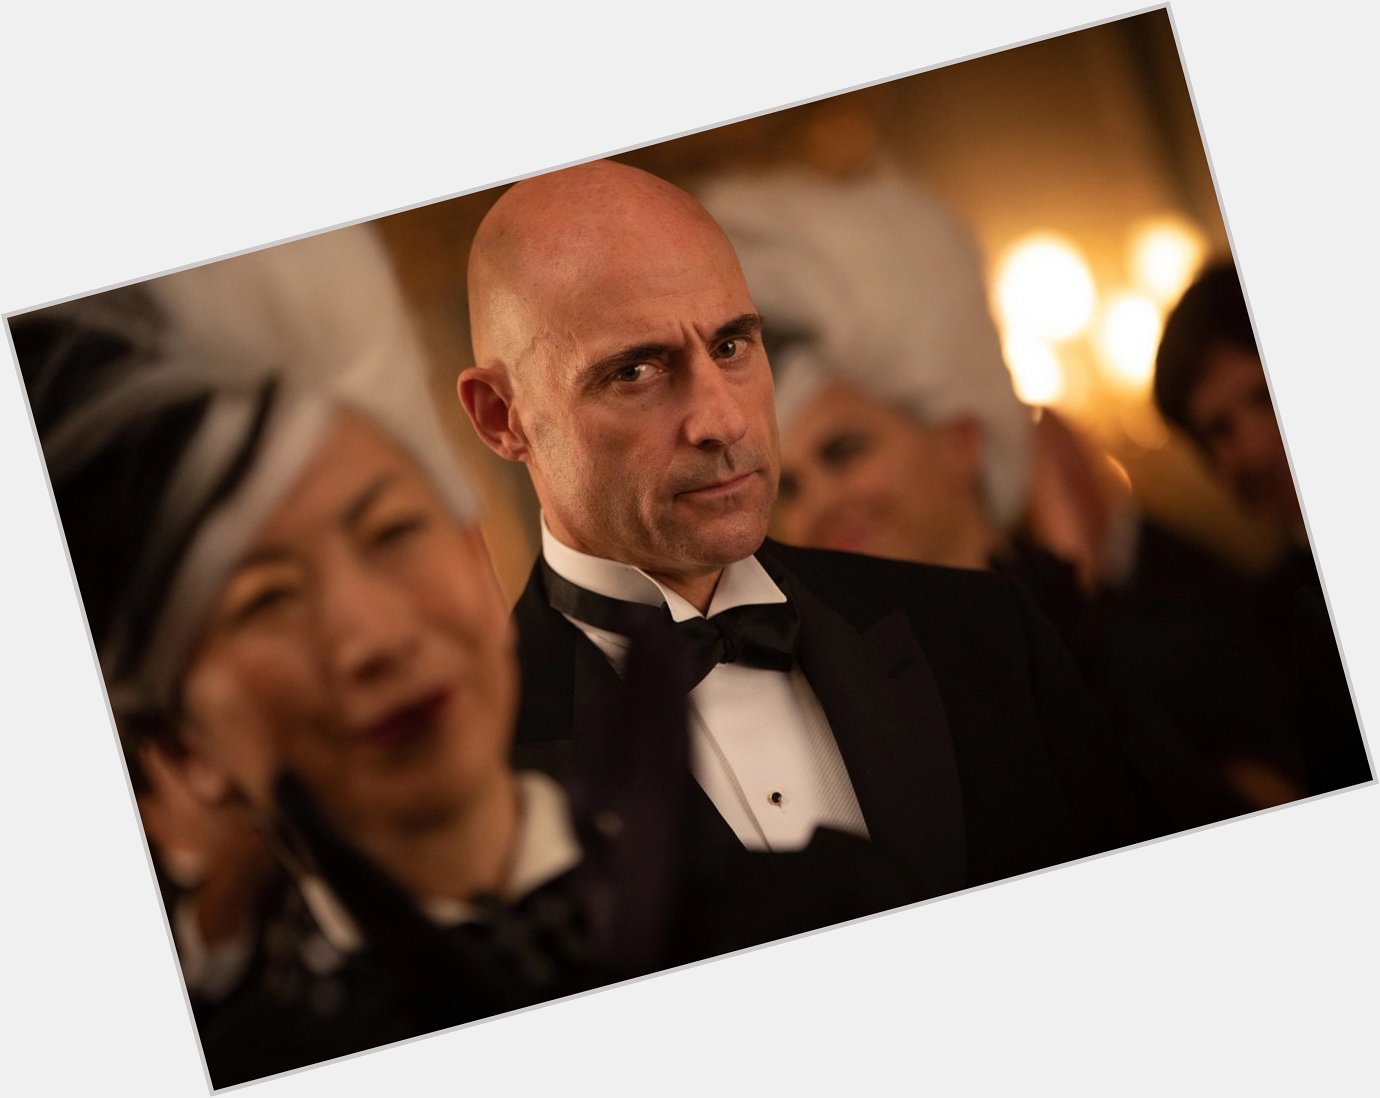 Happy birthday to one of my favorite actors, Mark Strong. If he s in the movie, it can t be 100% terrible. 